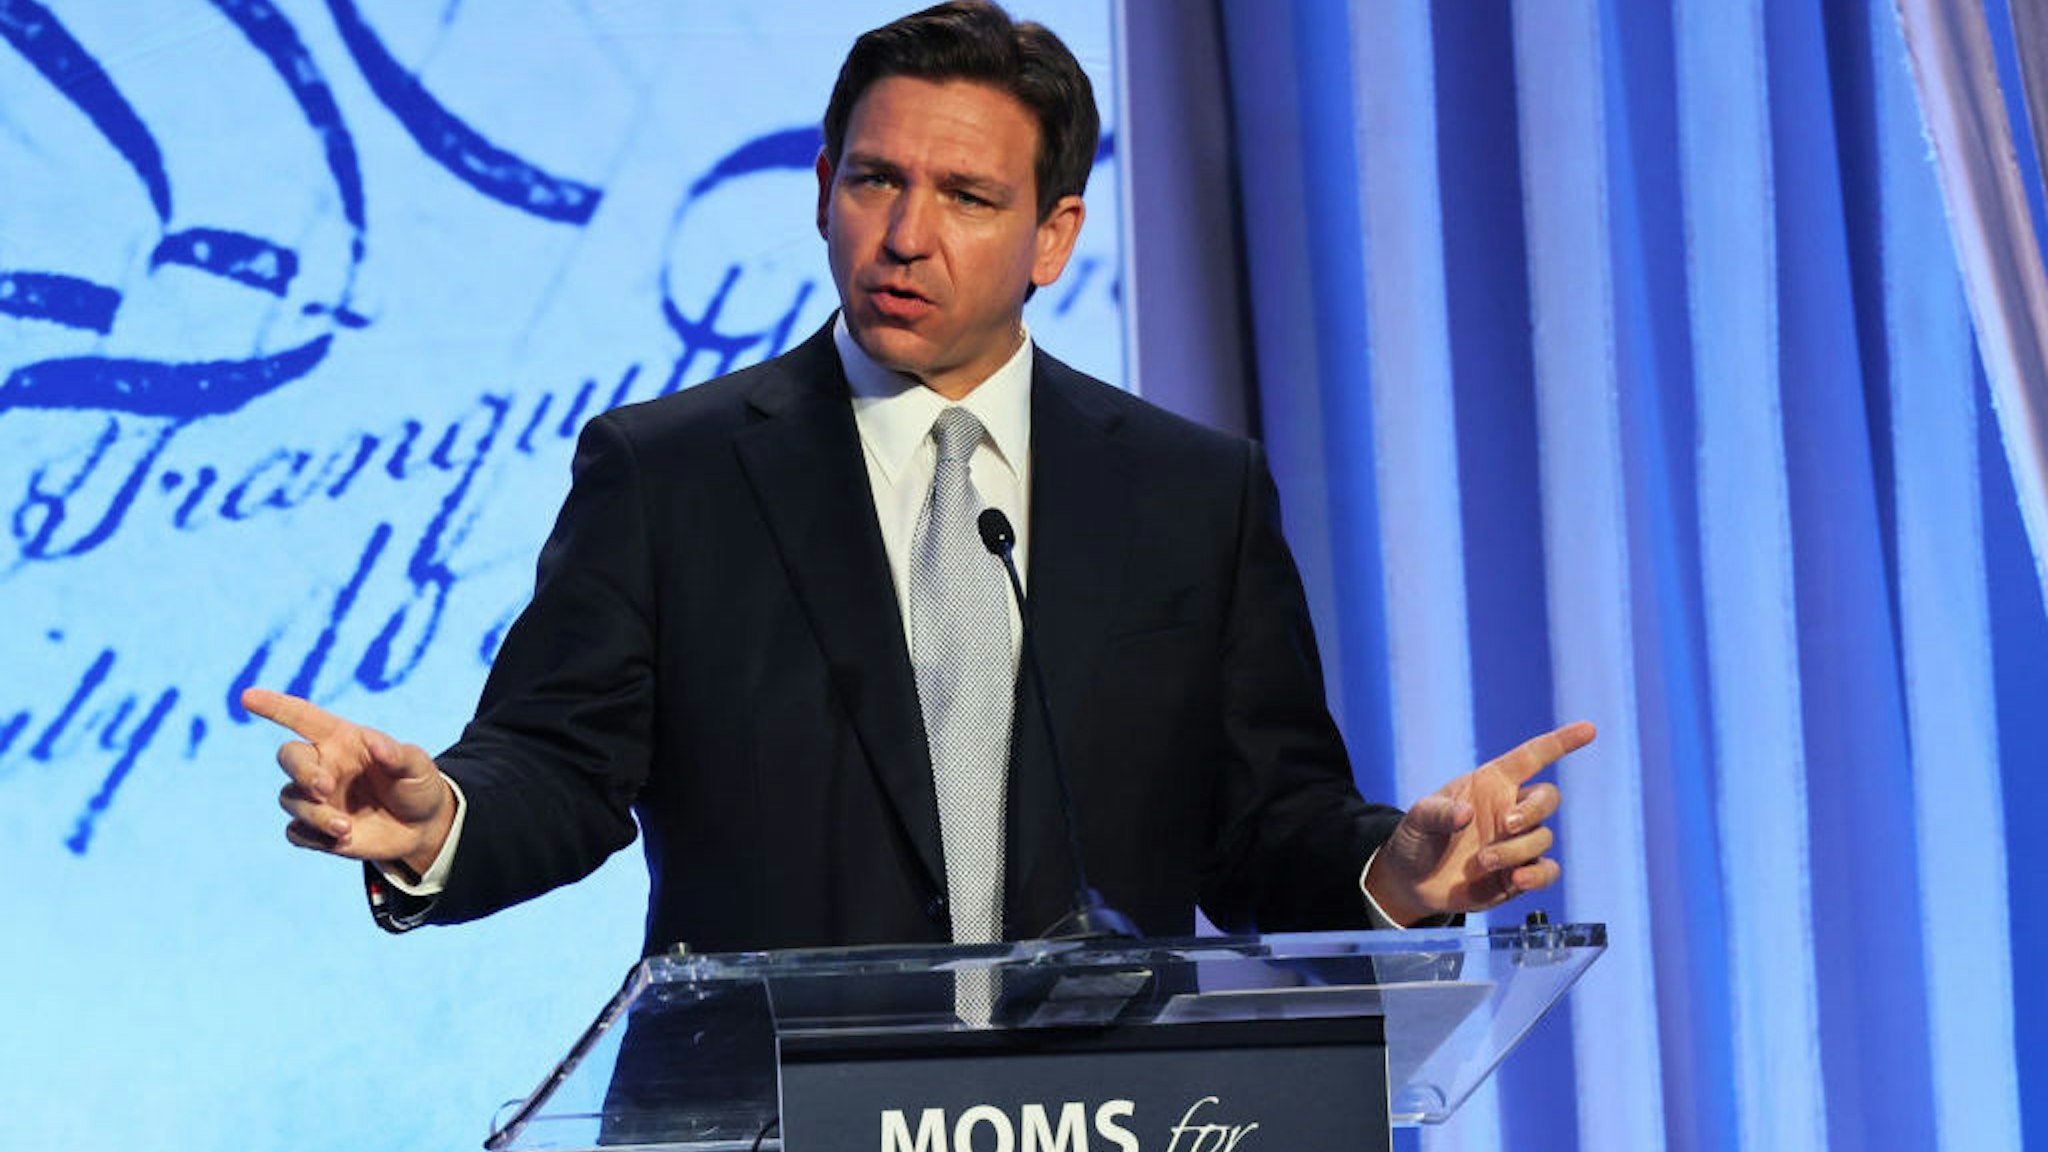 PHILADELPHIA, PENNSYLVANIA - JUNE 30: Republican presidential candidate Florida Gov. Ron DeSantis speaks during the Moms for Liberty Joyful Warriors national summit at the Philadelphia Marriott Downtown on June 30, 2023 in Philadelphia, Pennsylvania. The self-labeled "parental rights" summit is bringing school board hopefuls from across the country where attendees will receive training and hear from Republican presidential candidates which includes former U.S. President Donald Trump, Florida Gov. Ron DeSantis and former South Carolina Gov. Nikki Haley. The summit, which is being held in an overwhelmingly Democratic Philadelphia, have drawn protestors since the event was announced due to their pushing of book bans accusing schools of ideological overreach, including teaching about race, gender, and sexuality. (Photo by Michael M. Santiago/Getty Images)